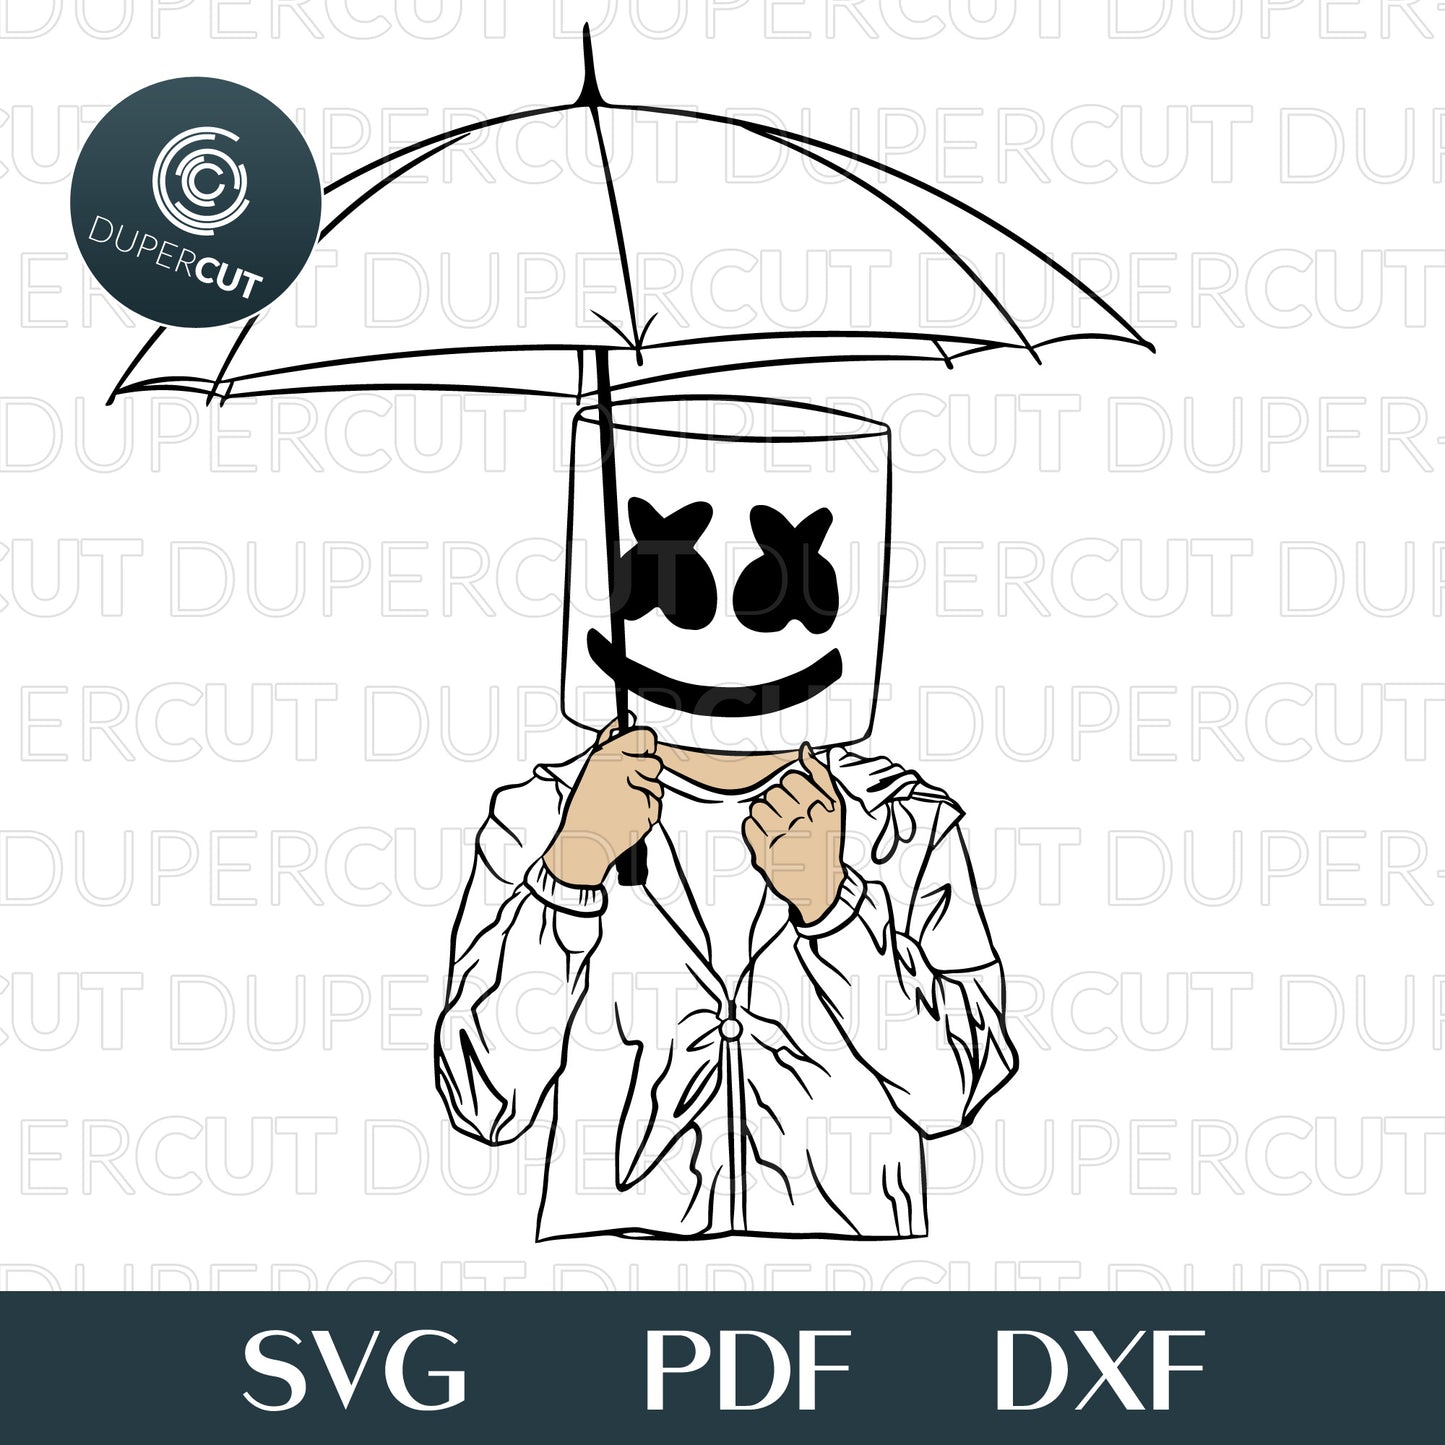 Marshmello DJ with umbrella Illustration, fan art custom design. Printable SVG PNG files. For Birthday party, crafting, print and cut.